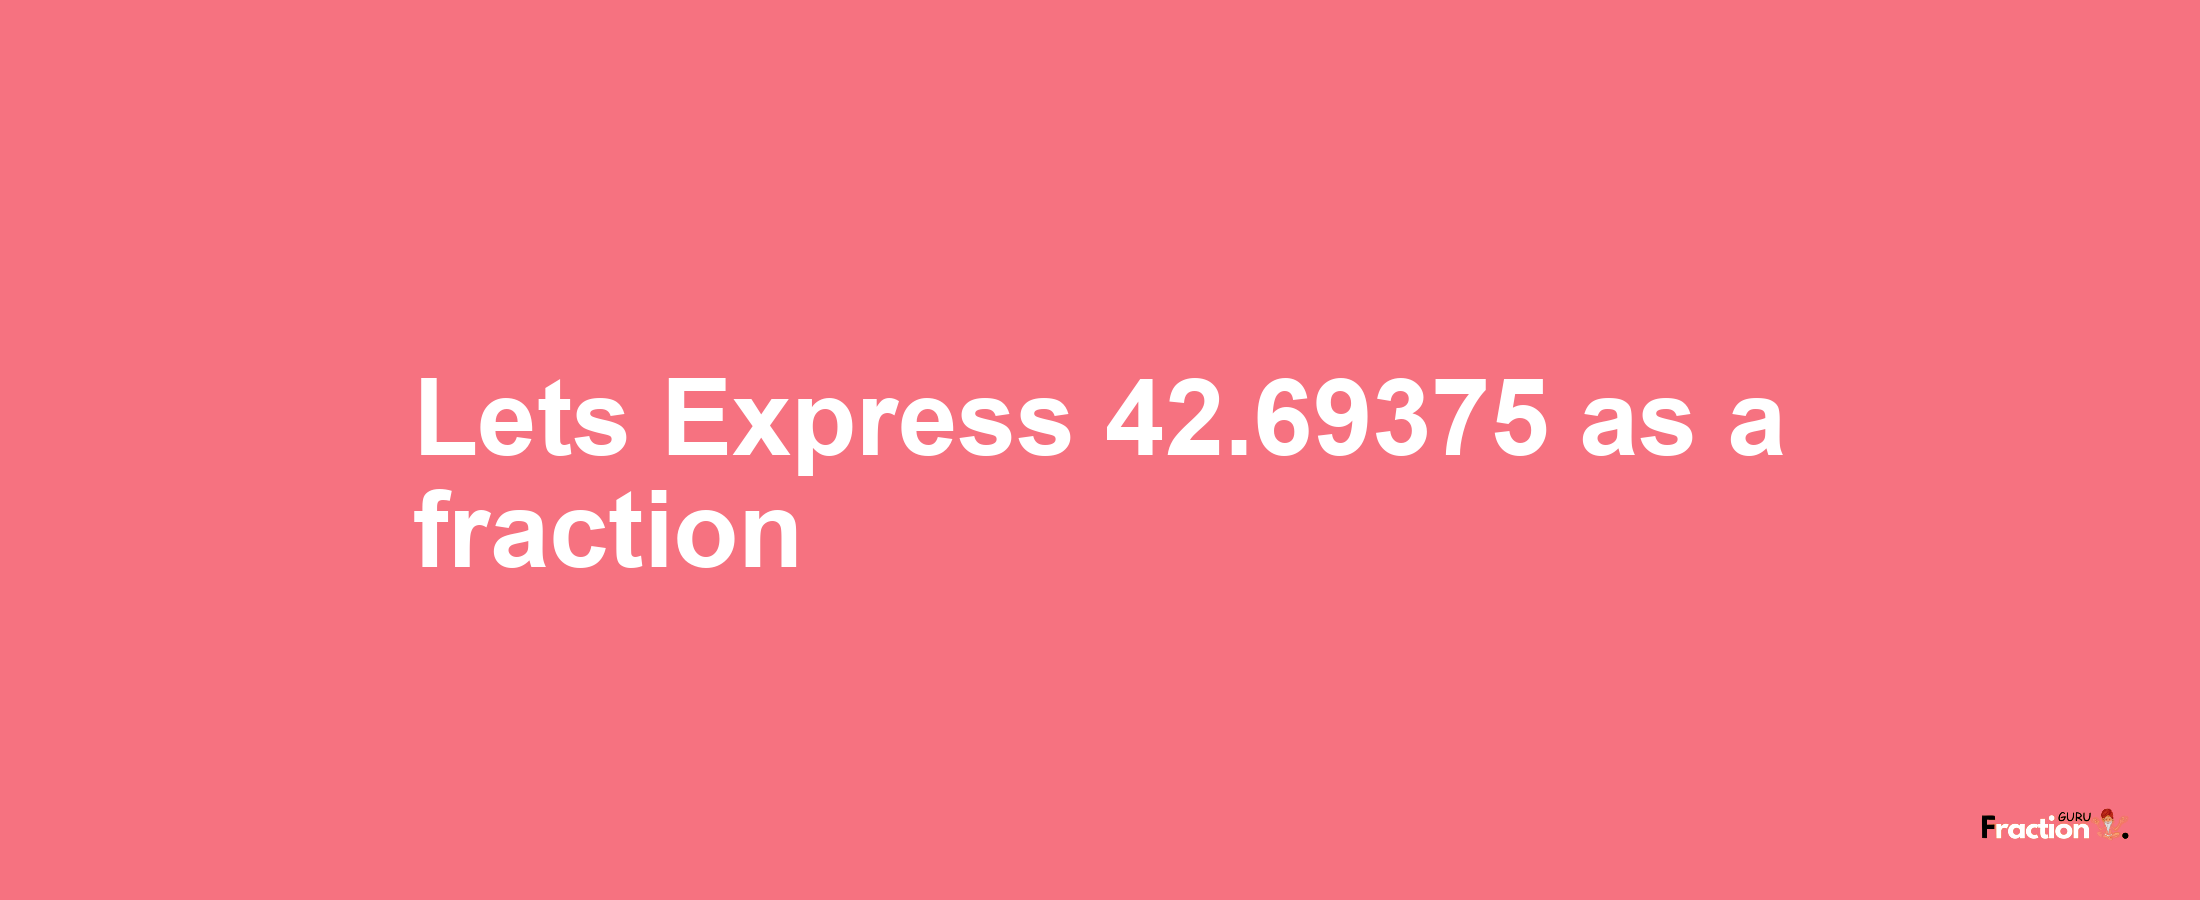 Lets Express 42.69375 as afraction